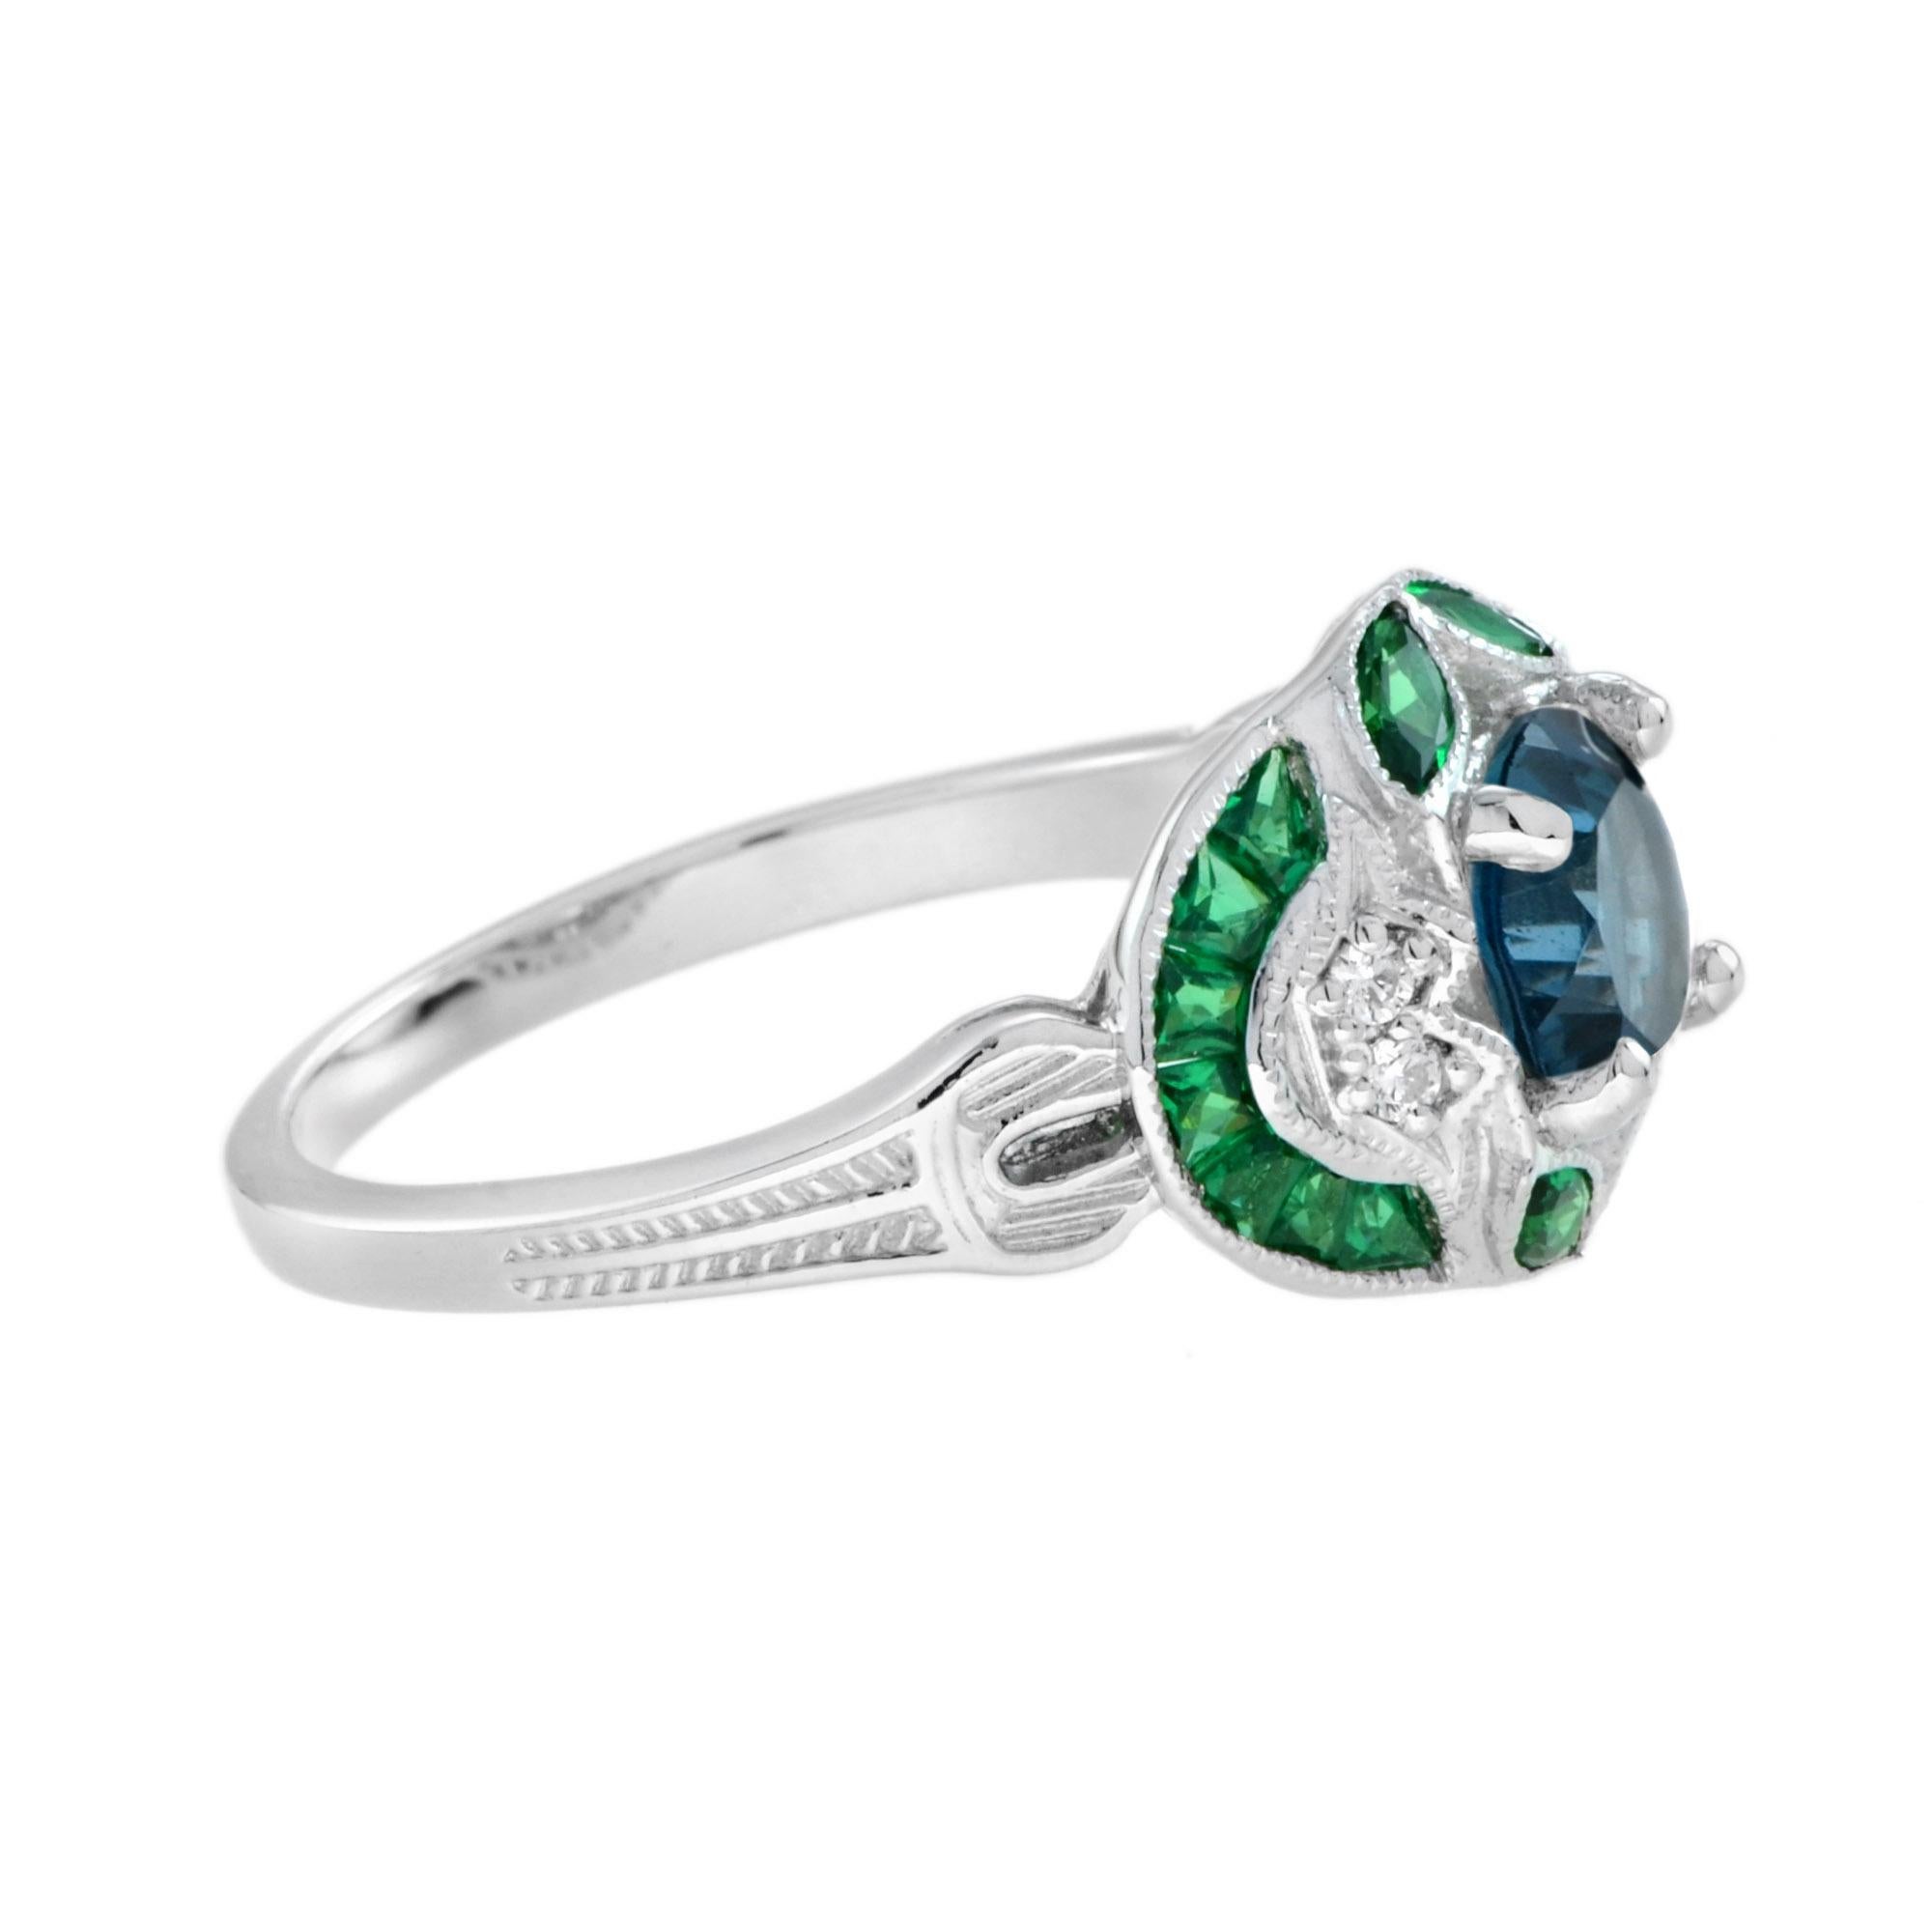 Charming Art Deco style ring featuring a London blue topaz center surrounded by French cut emerald and diamonds in 18k white gold. Designed perfectly for everyday wear, this beautiful piece would make the perfect engagement or dress ring. 

Ring